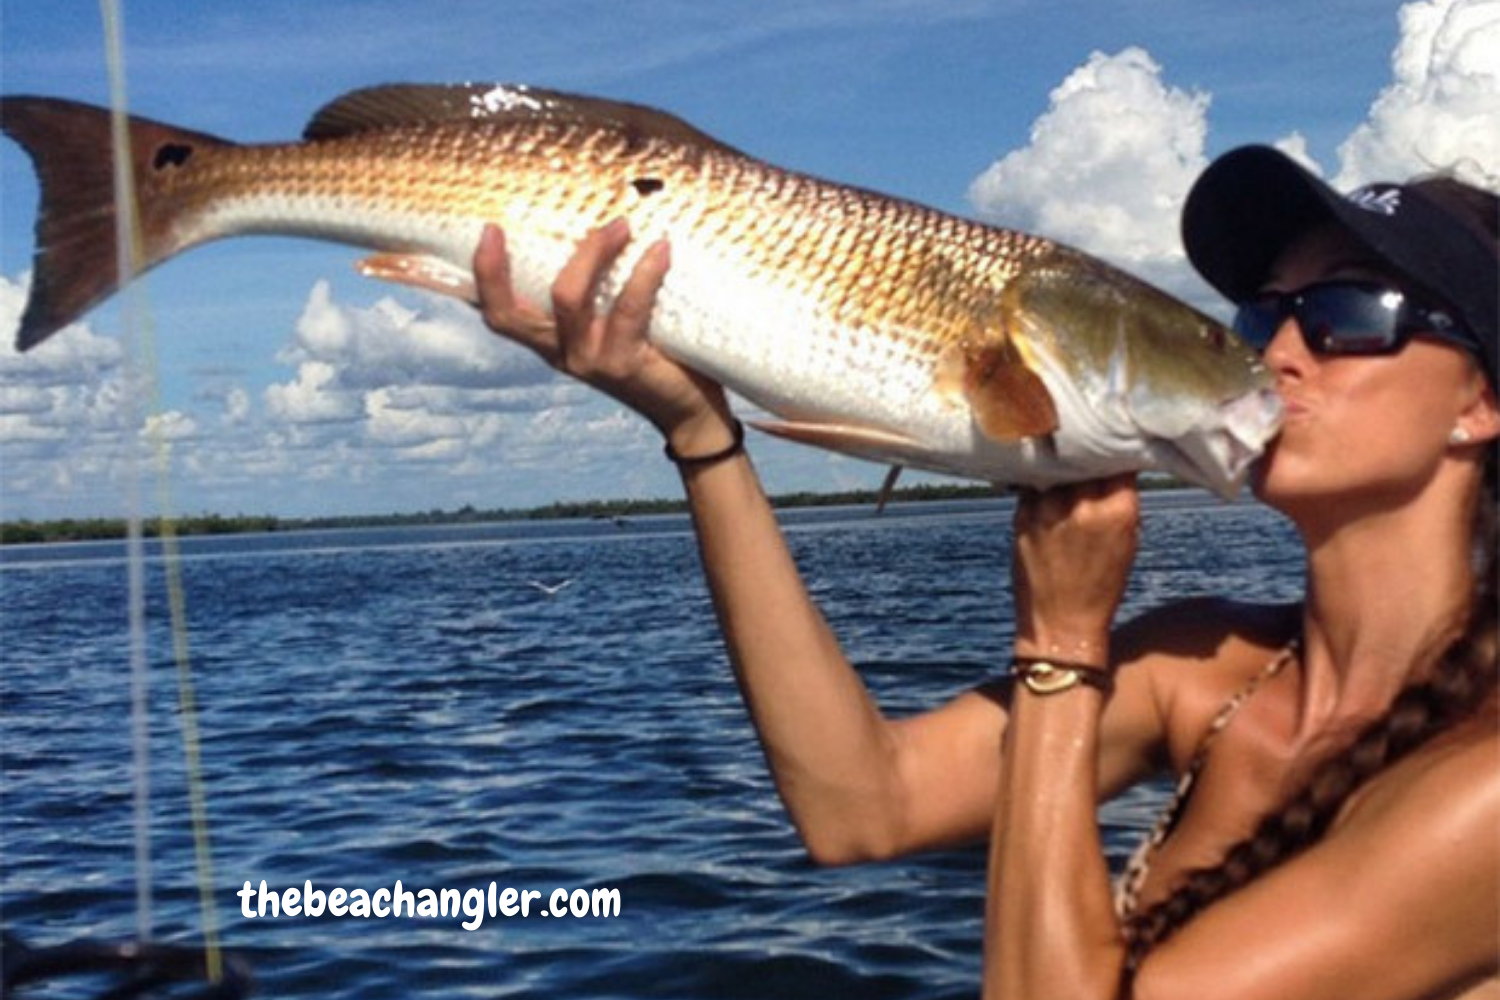 Lady giving a big kiss to a nice redfish caught from the surf